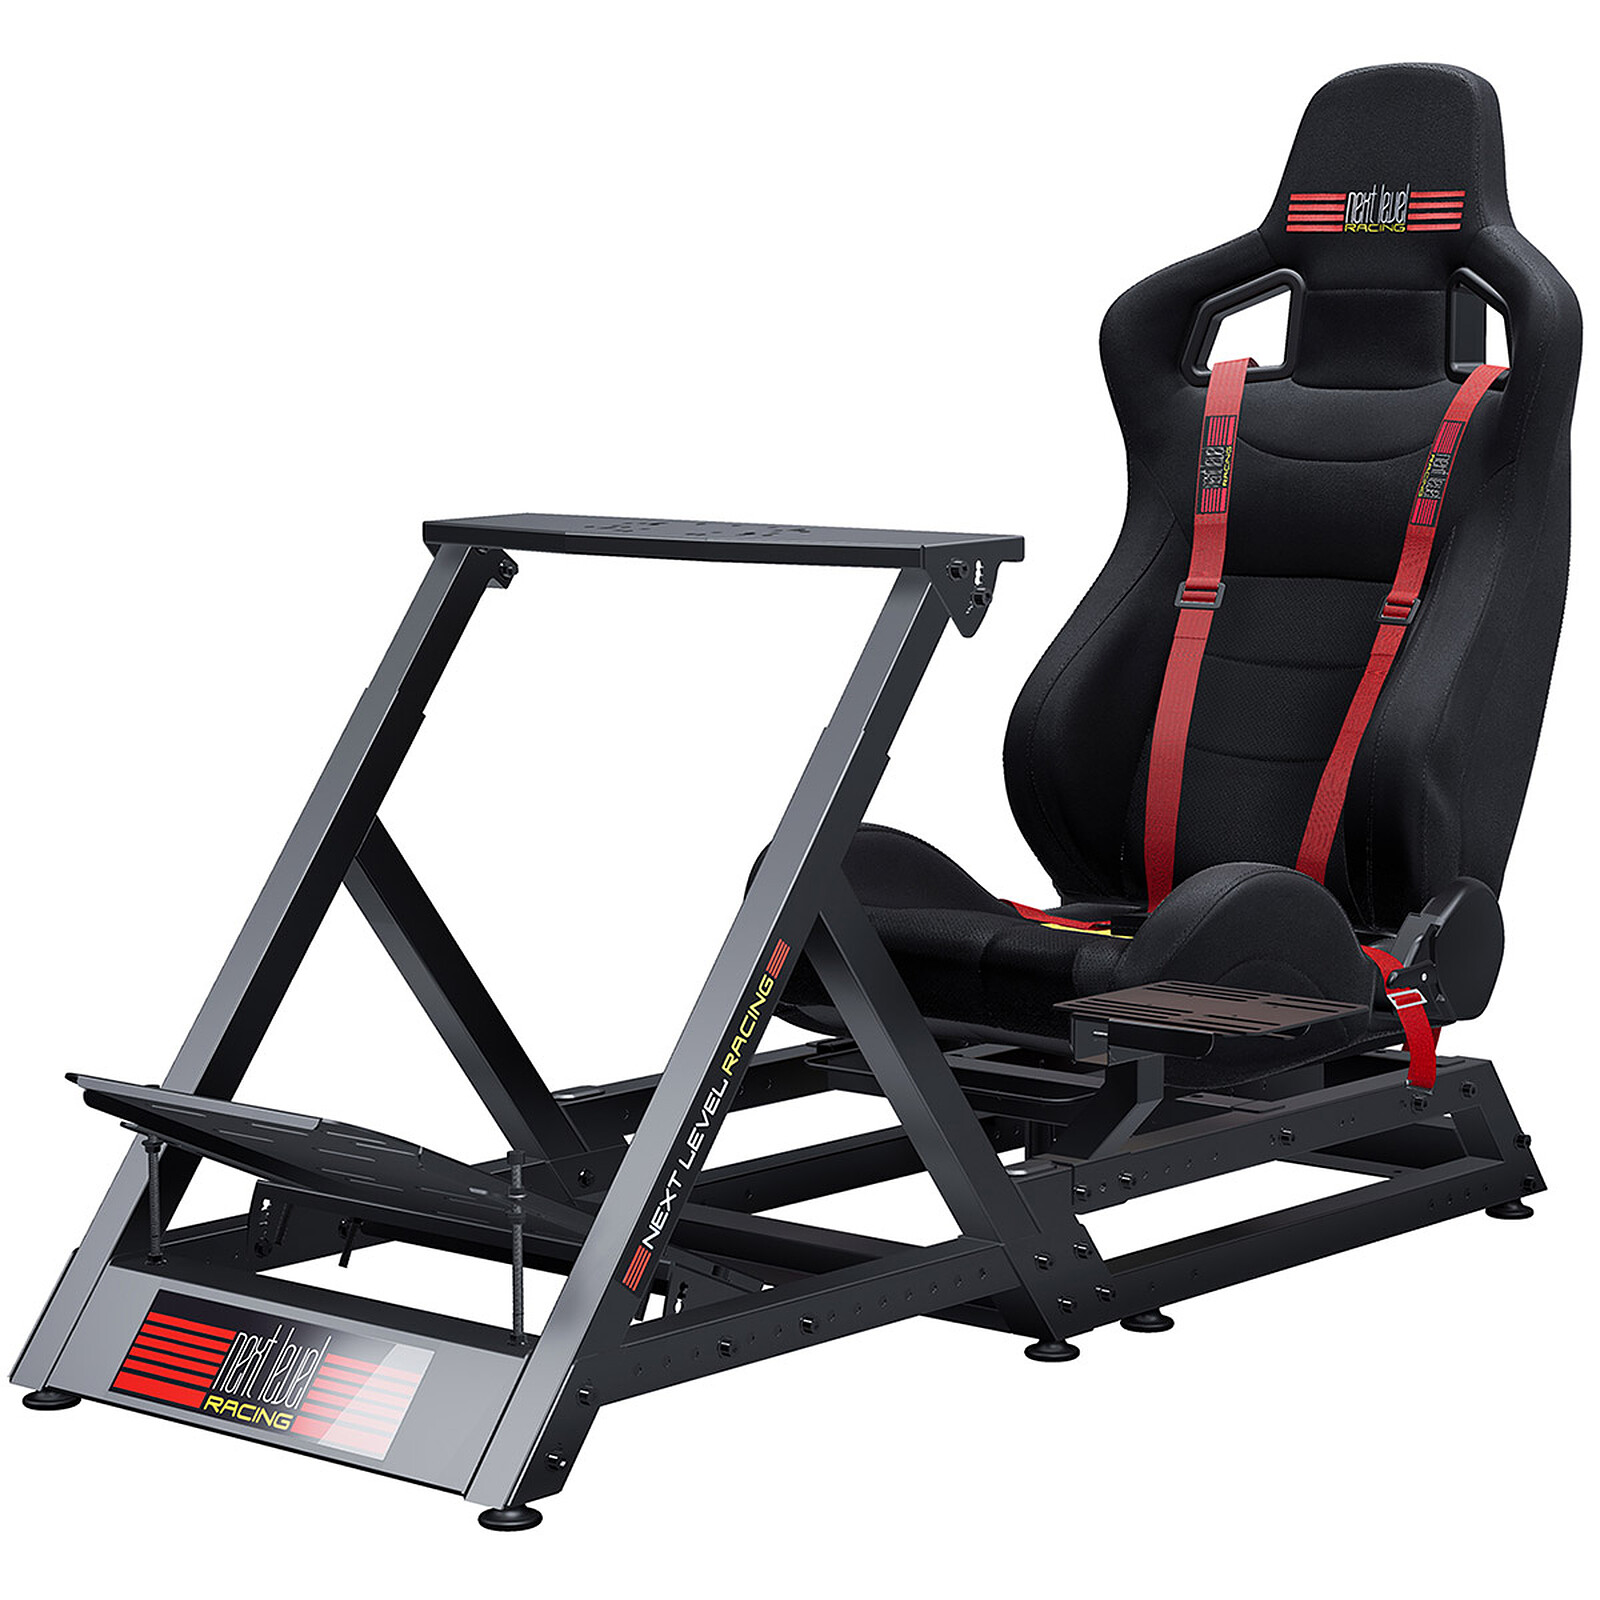 Next Level Racing GTUltimate Keyboard and Mouse Stand - Autres accessoires  jeu - Garantie 3 ans LDLC